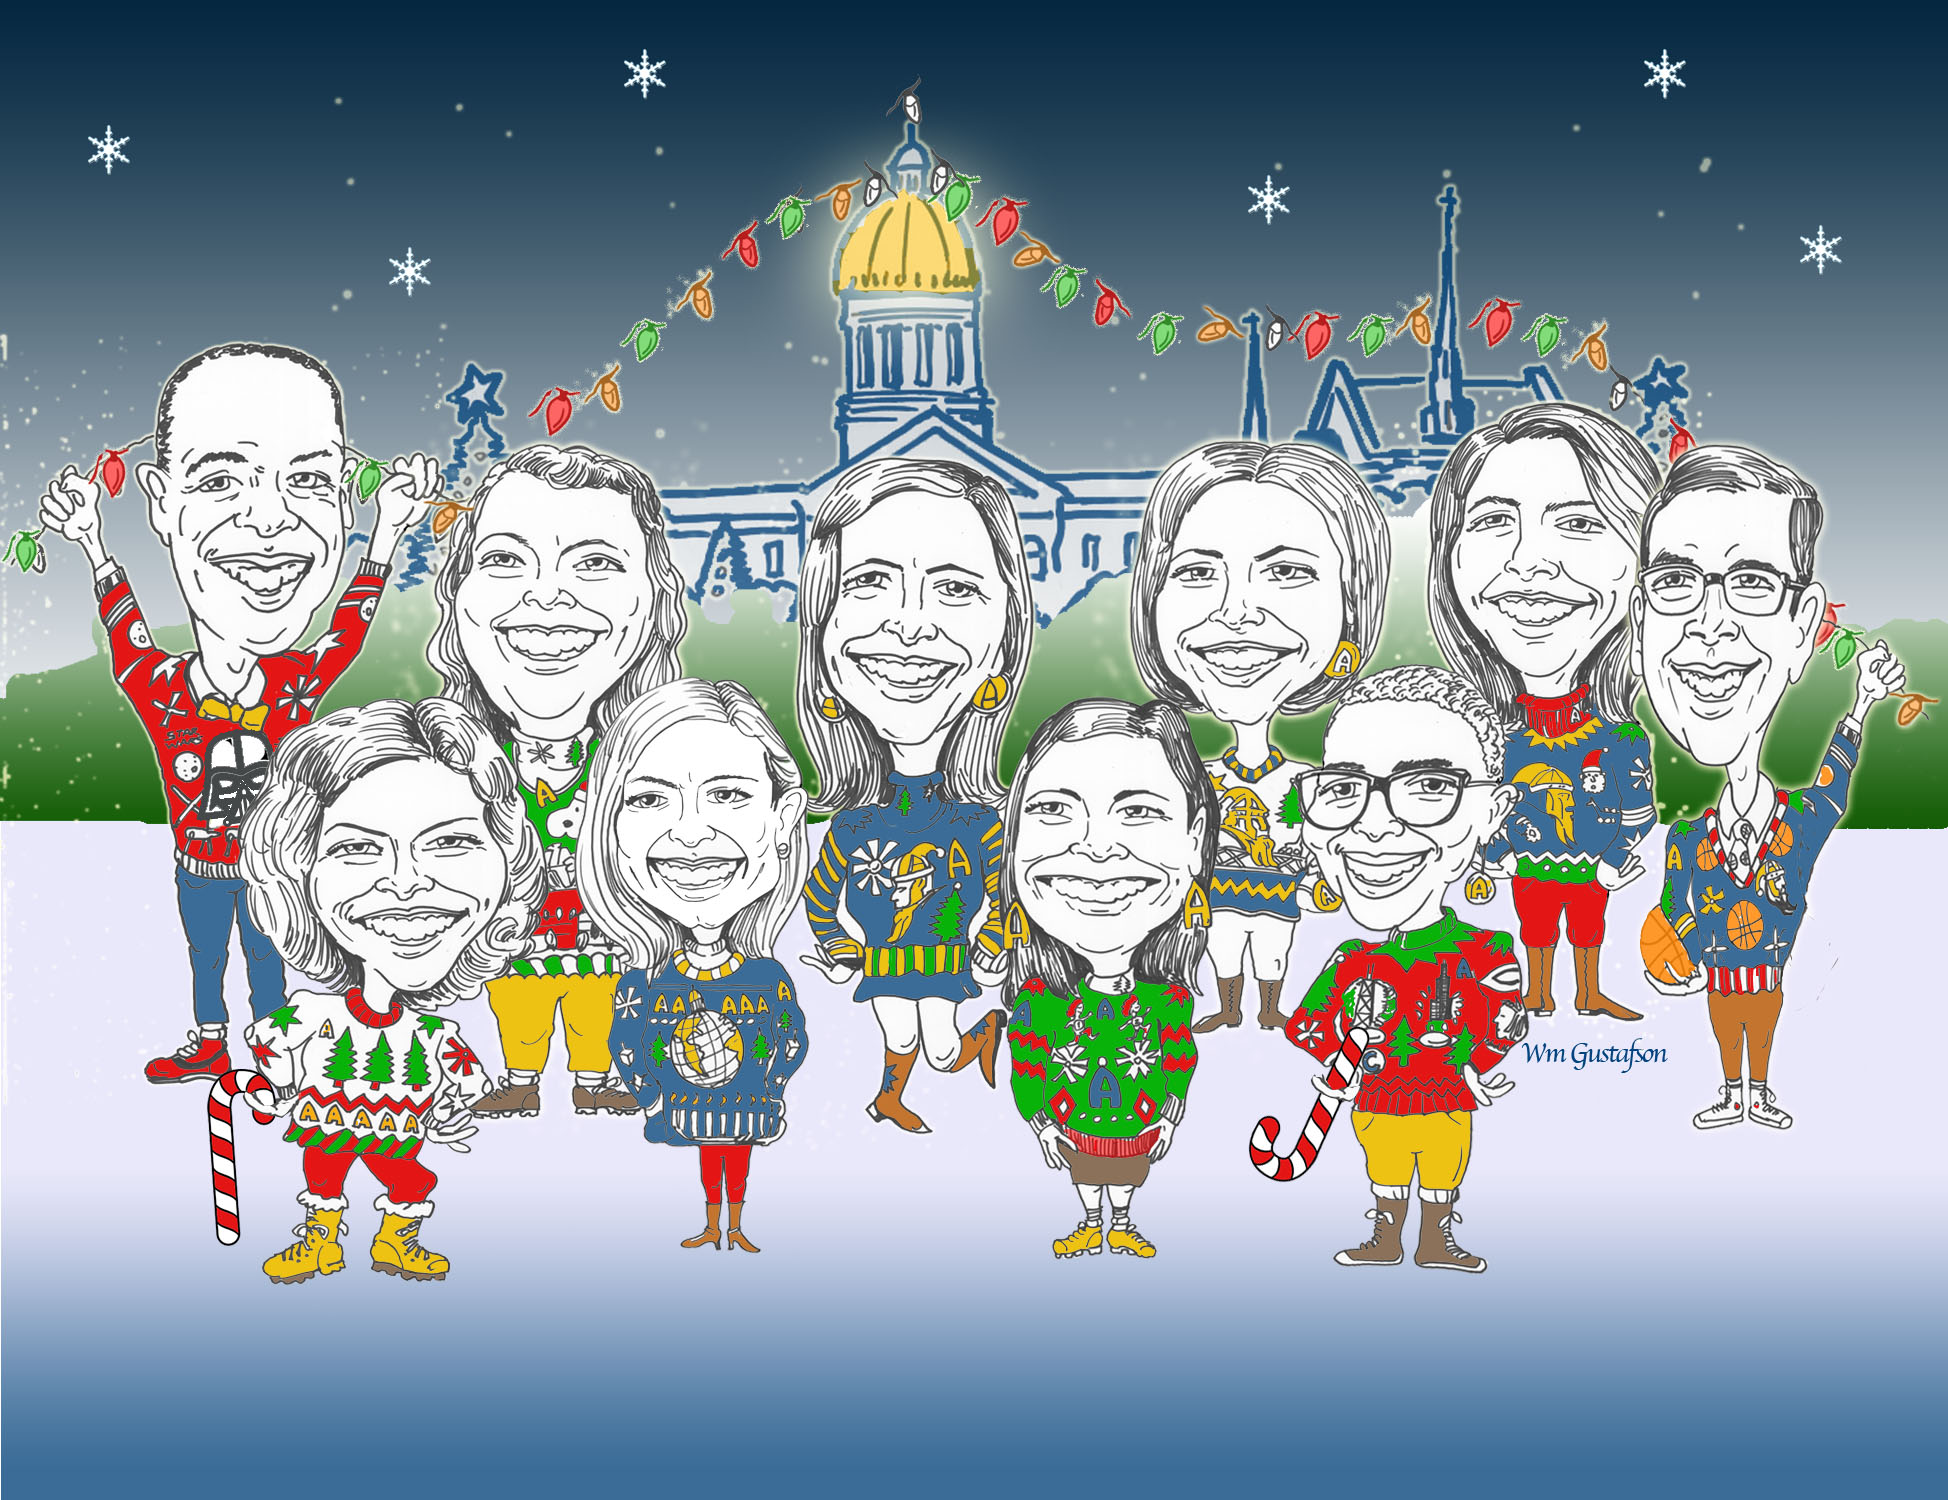 Caricature of Augustana College staff on a Christmas card